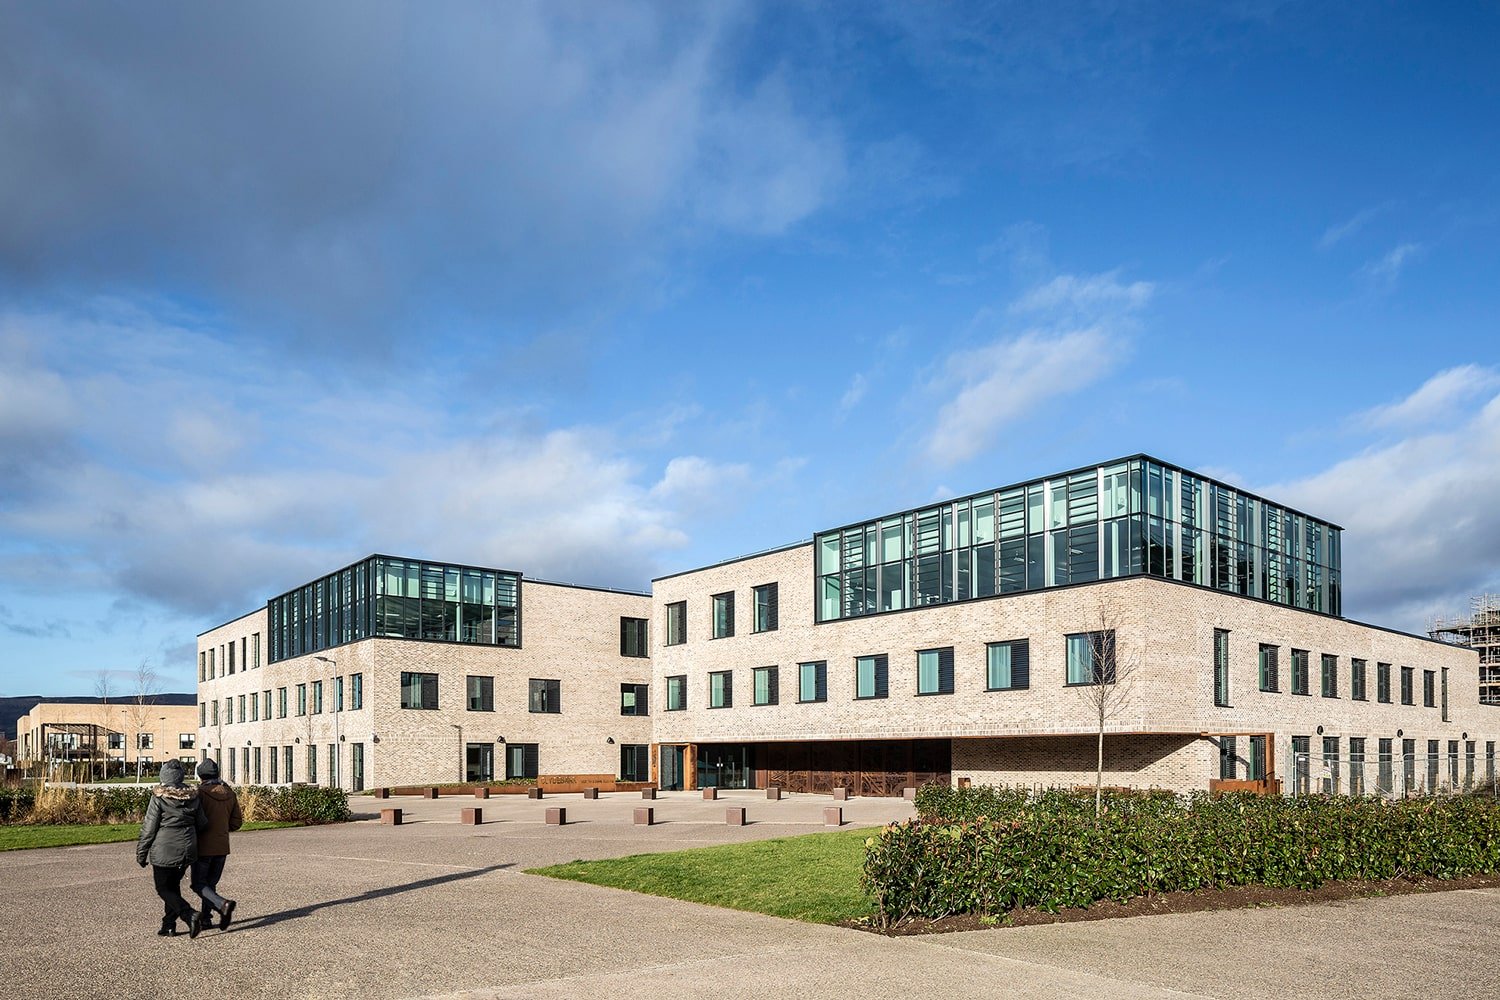 gia-design-awards-2022-healthcare-award-anderson-bell-christie-architects-clydebank-health-and-care-centre-photographer-keith-hunter-1-min.jpg